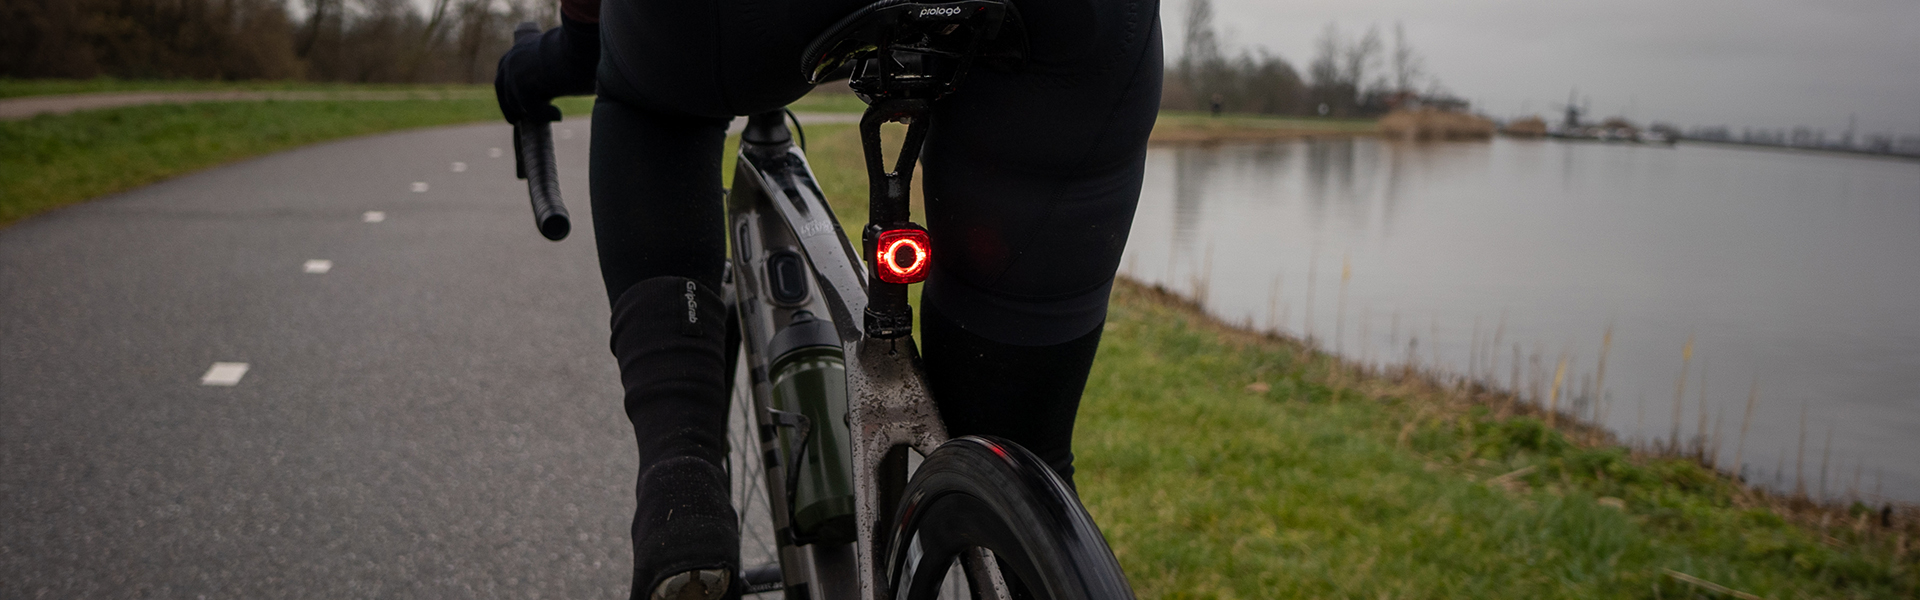 Sate-lite ebike light ISO6742-1 AS GB BS eletric bike tail light with ECE reflector mount on rear render